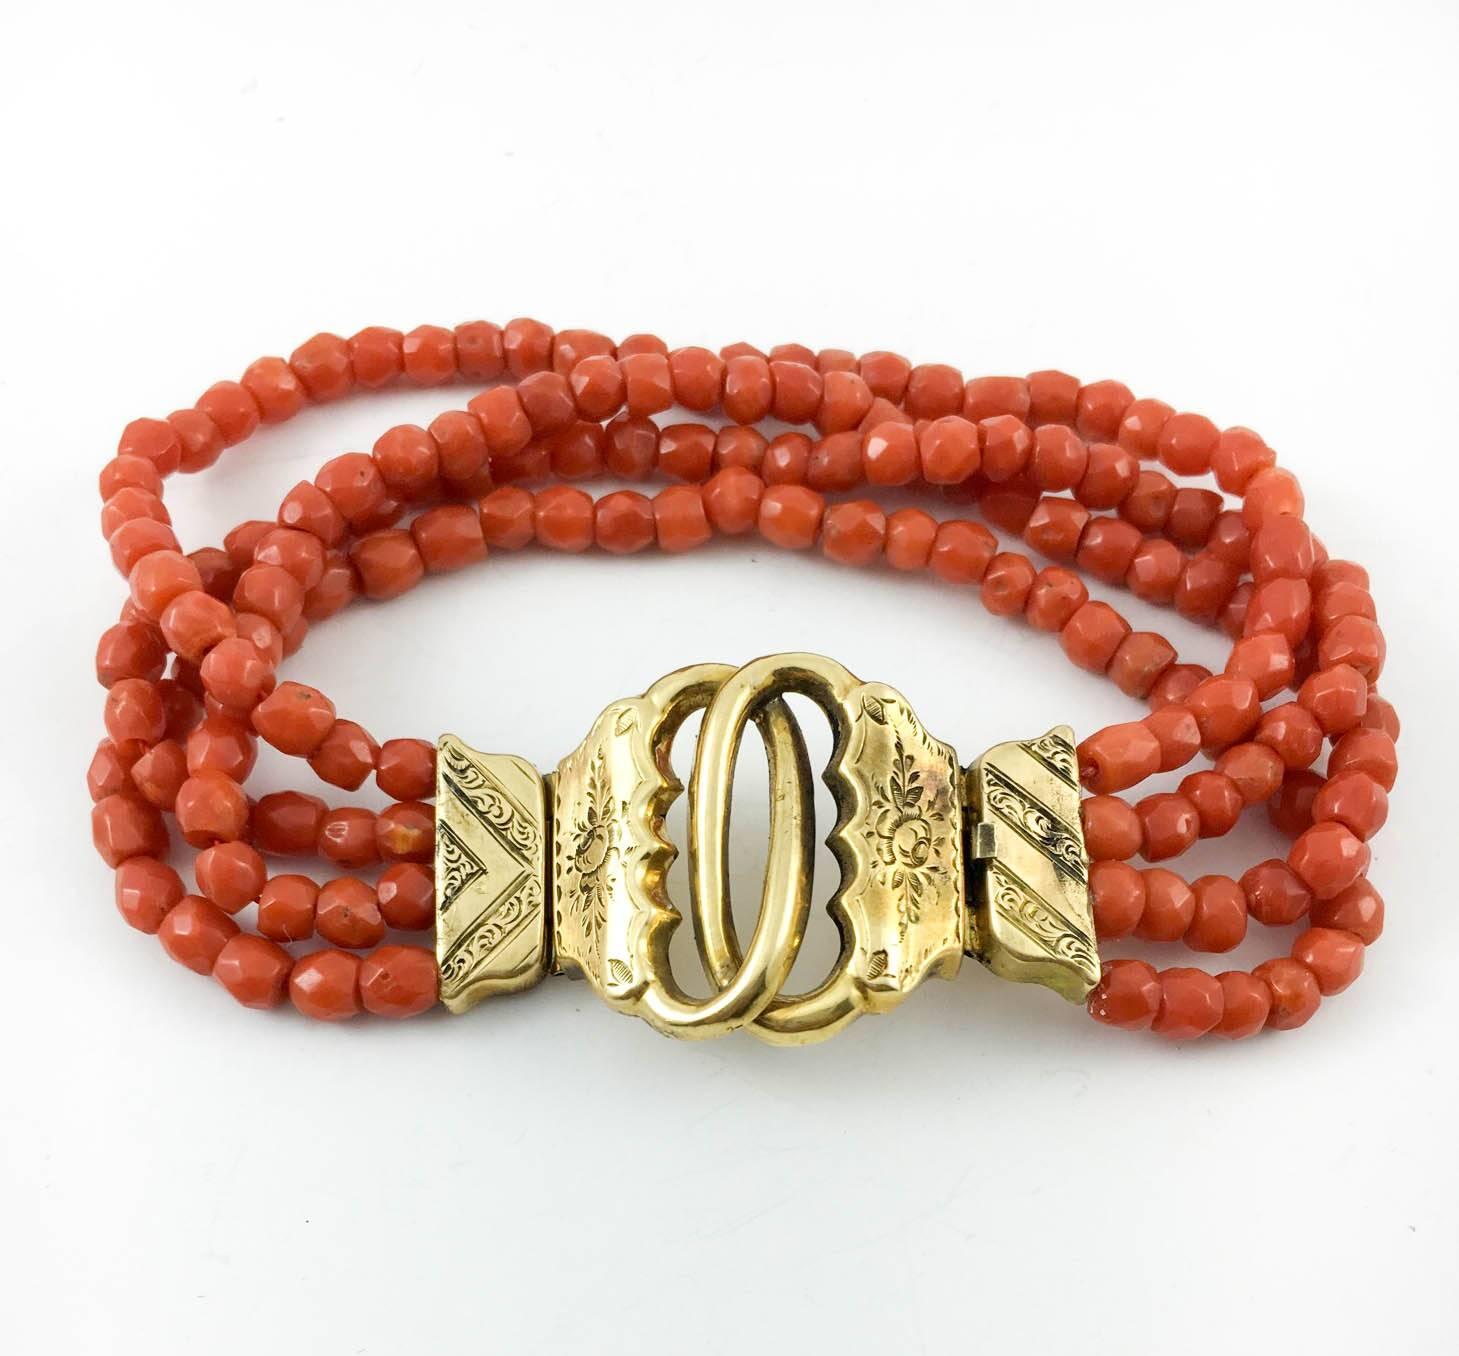 Women's Antique Multi-Strand Coral and Gold Bracelet - Mid 19th Century